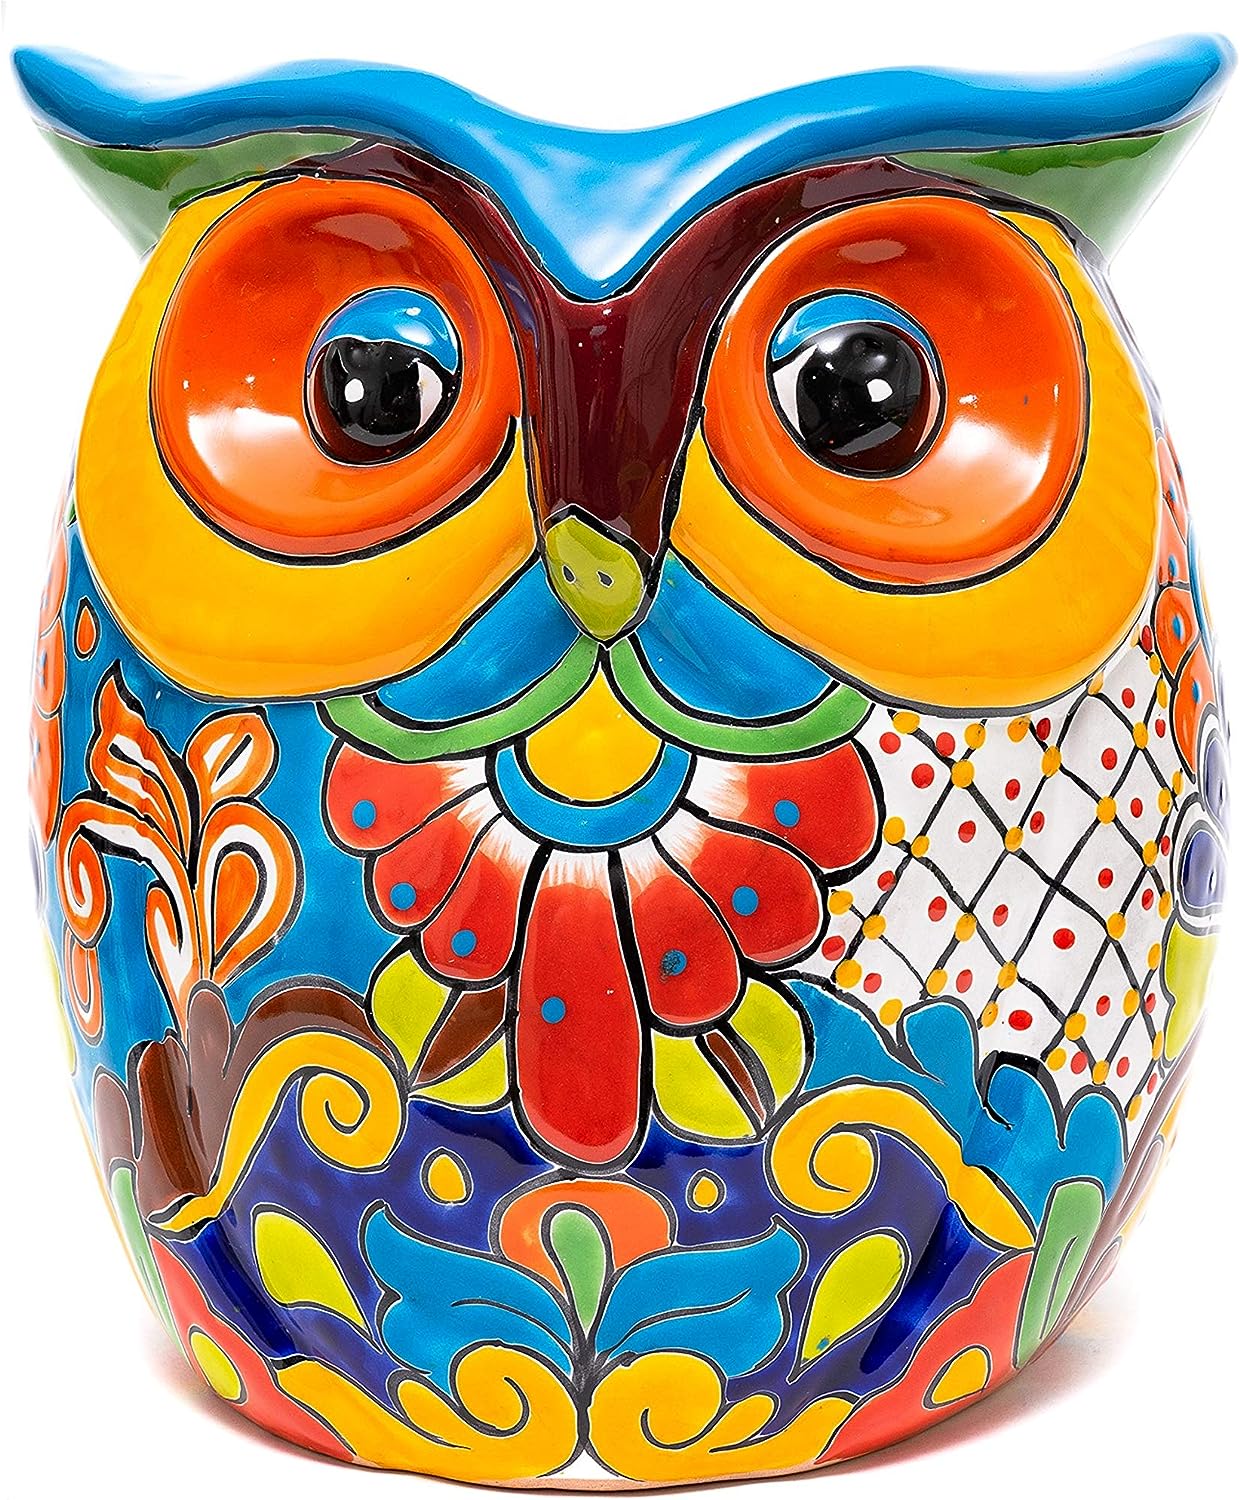 Enchanted Talavera Mexican Pottery Extra Large Owl Flower Pot Hand Painted Ceramic Plant Pot Planter Indoor Outdoor Porch Flower Vase Garden Statue Sculpture Outdoor Decor Animal Butterfly Frog